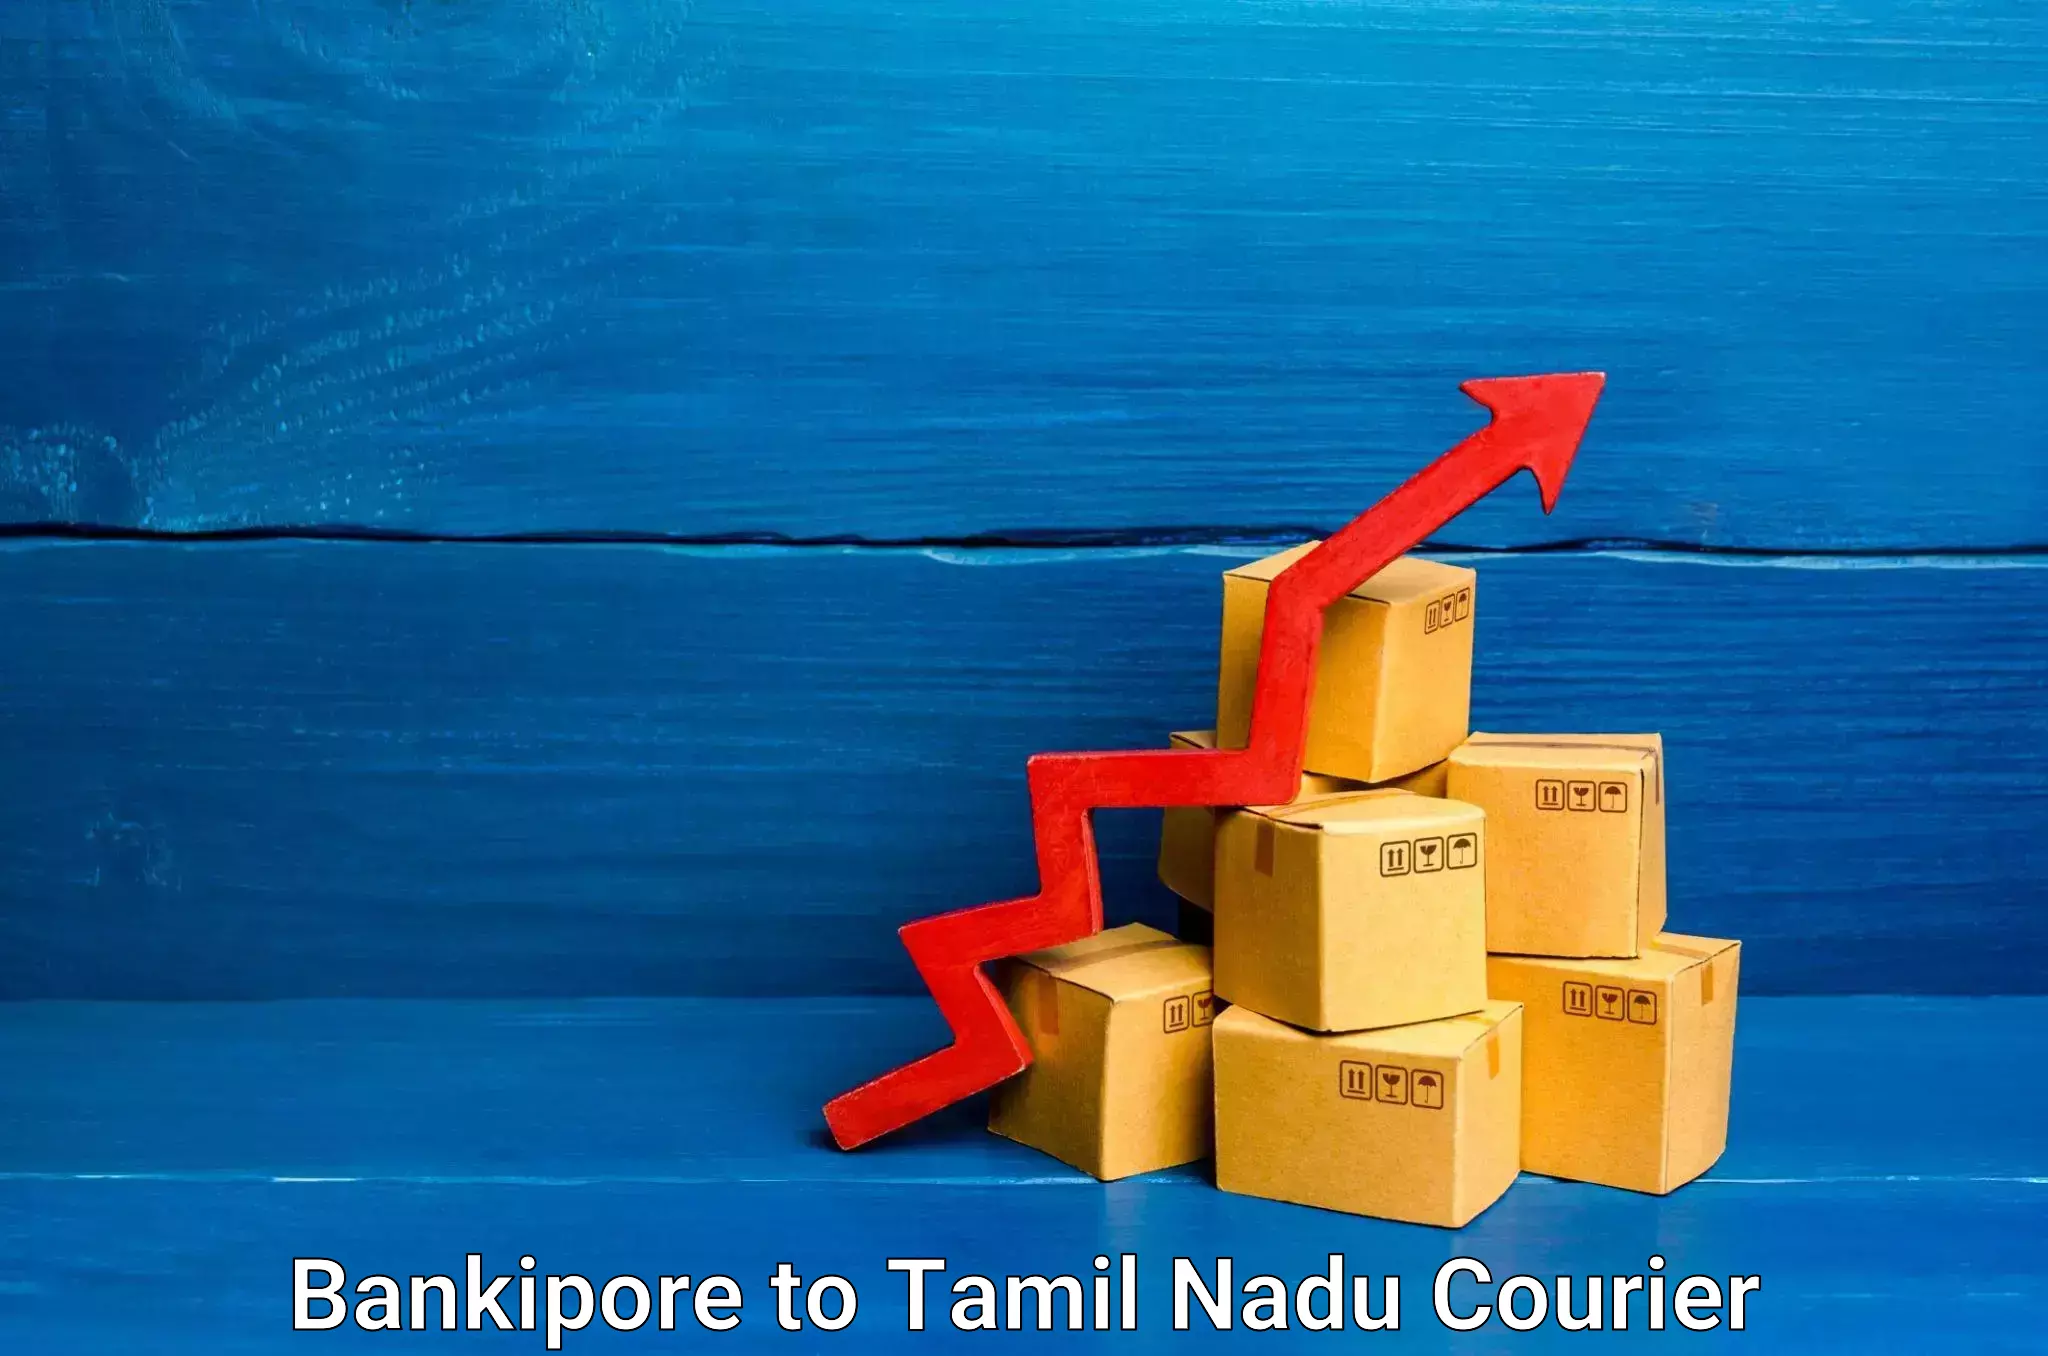 Home moving specialists Bankipore to Tamil Nadu